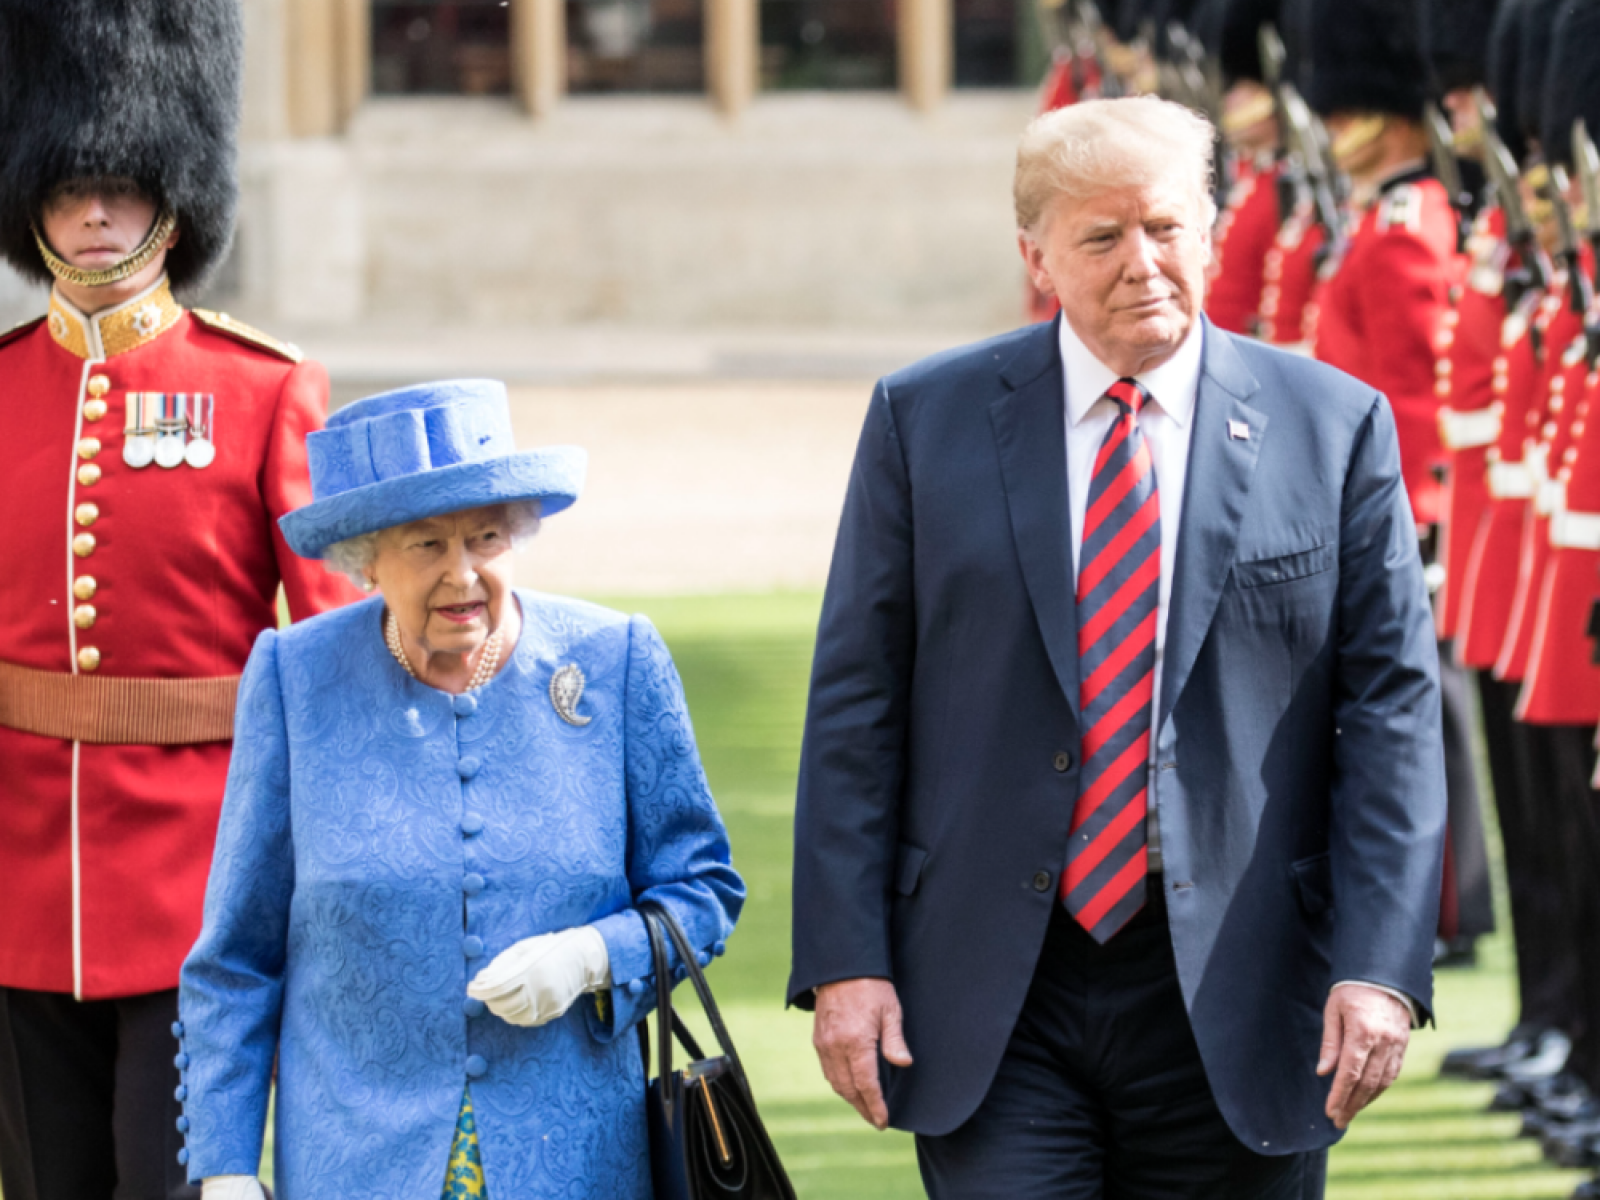 Video of Trump Defying Royal Protocol When Meeting Queen Resurfaces